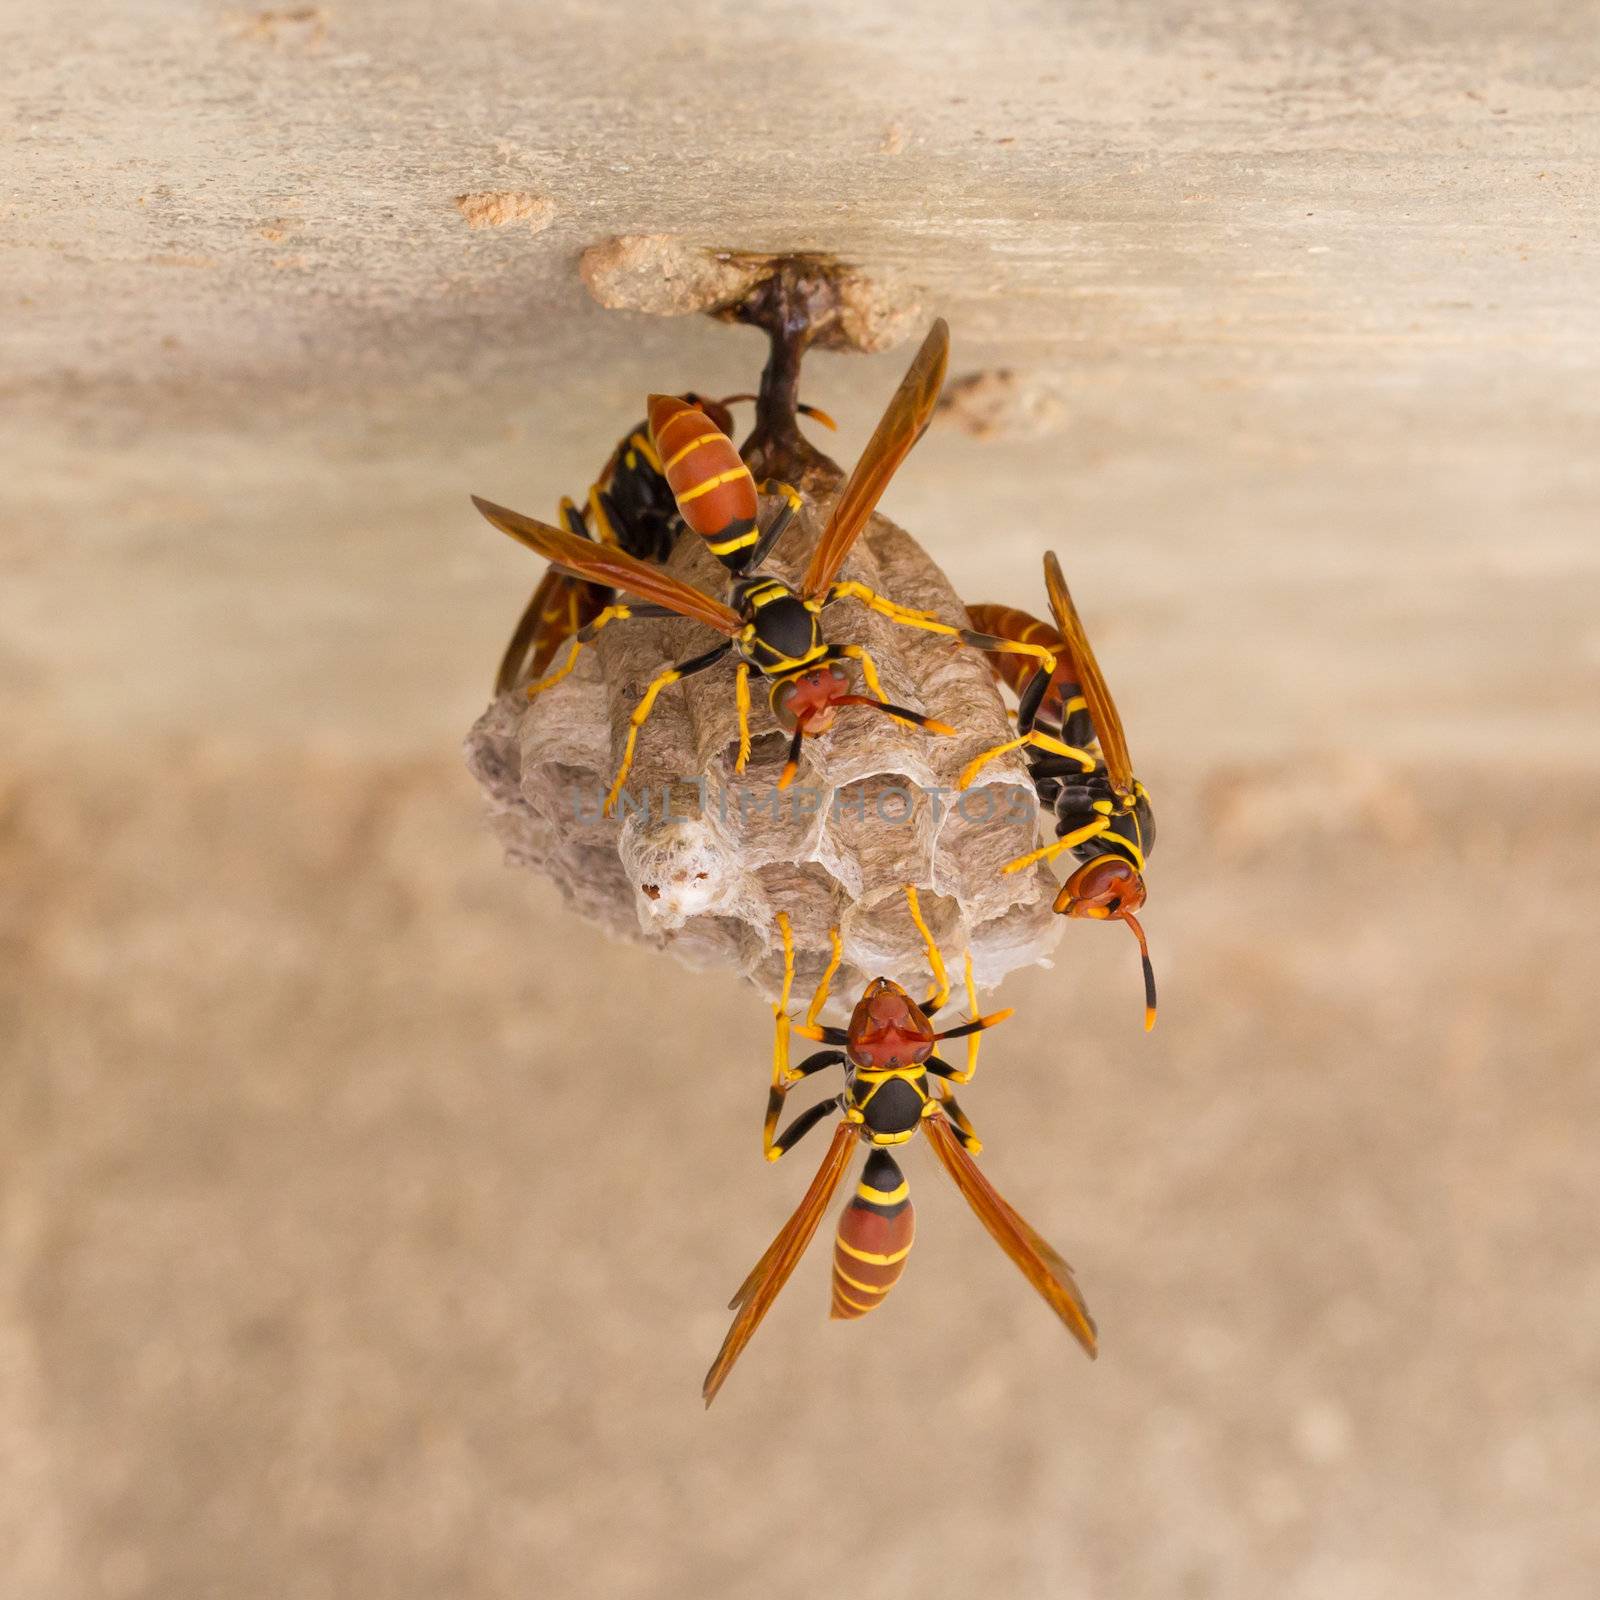 Jack Spaniard wasps on a small nest by michaklootwijk